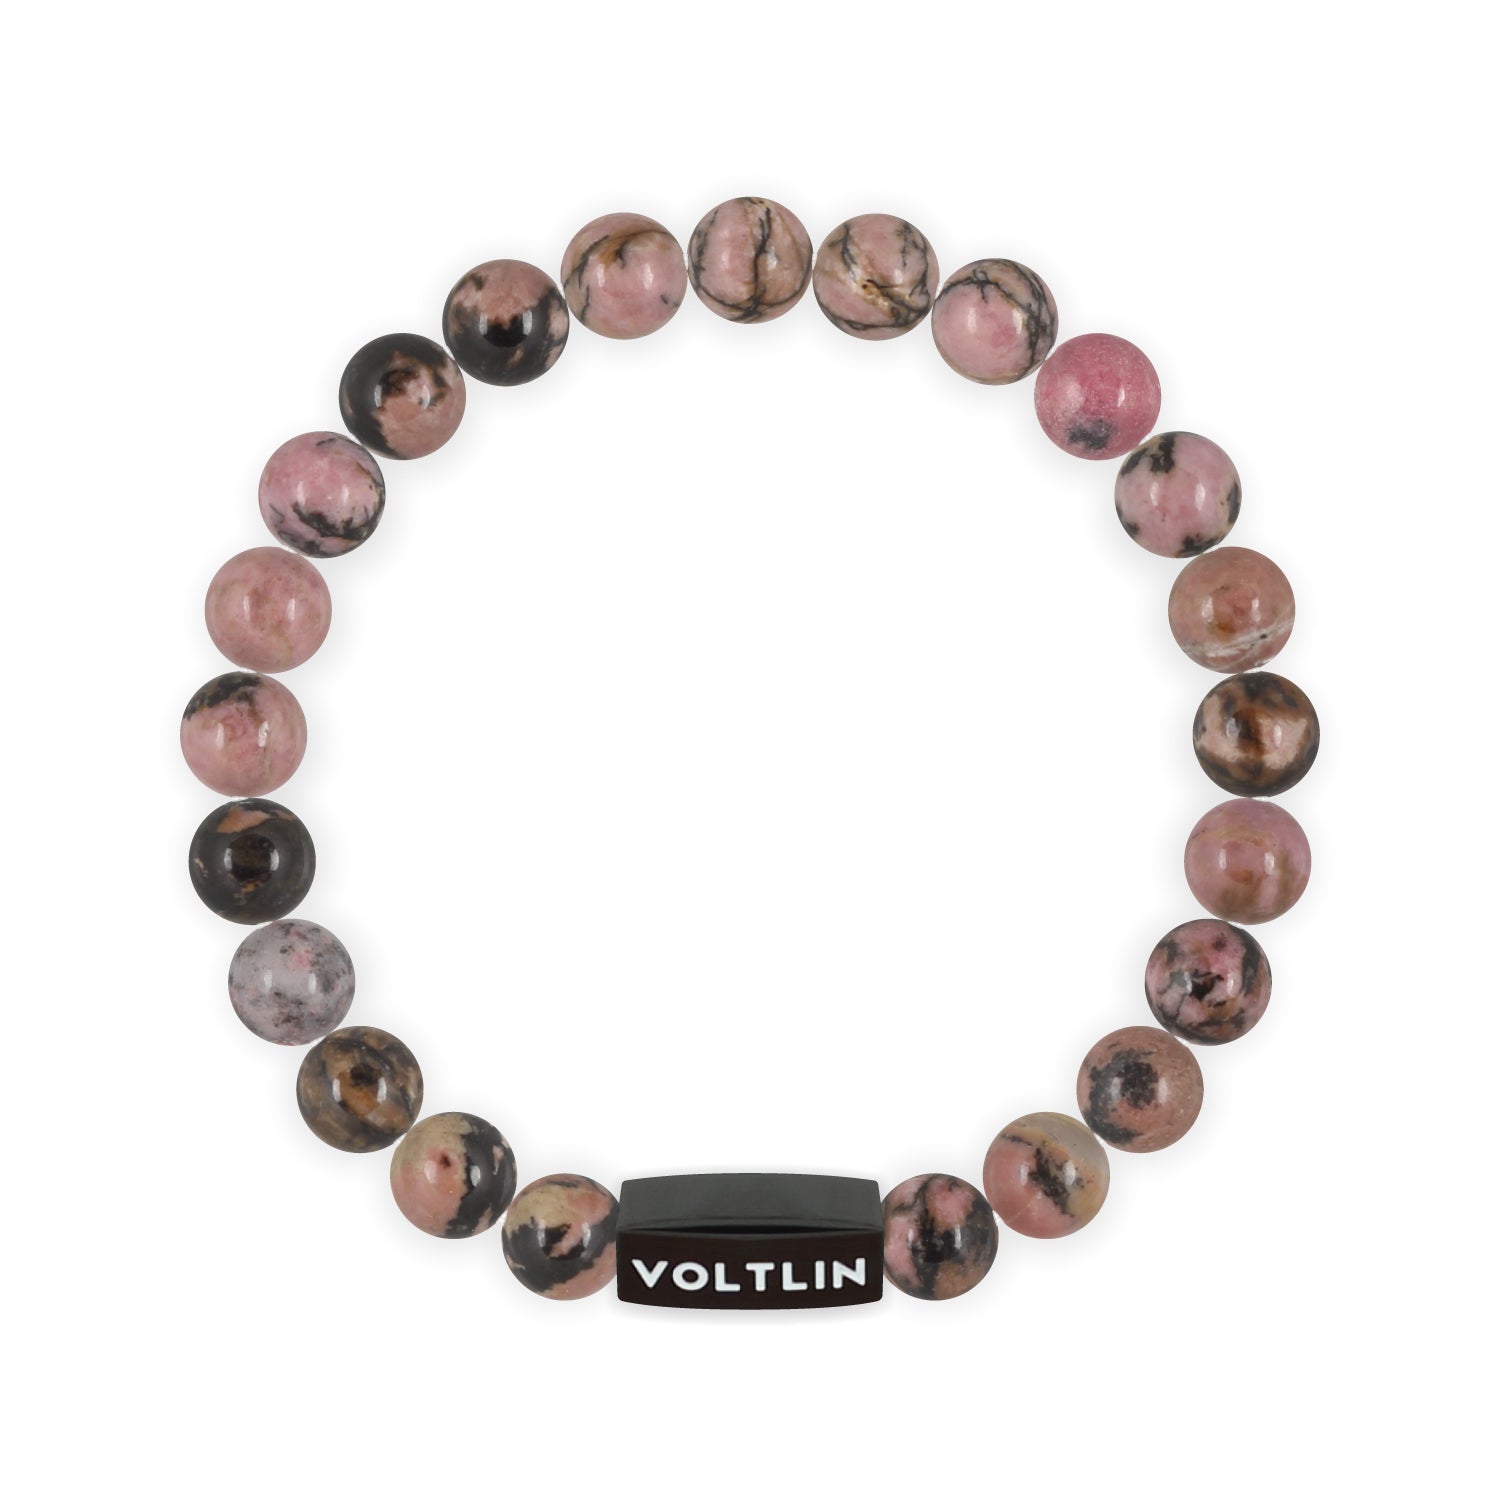 Front view of an 8mm Rhodonite crystal beaded stretch bracelet with black stainless steel logo bead made by Voltlin